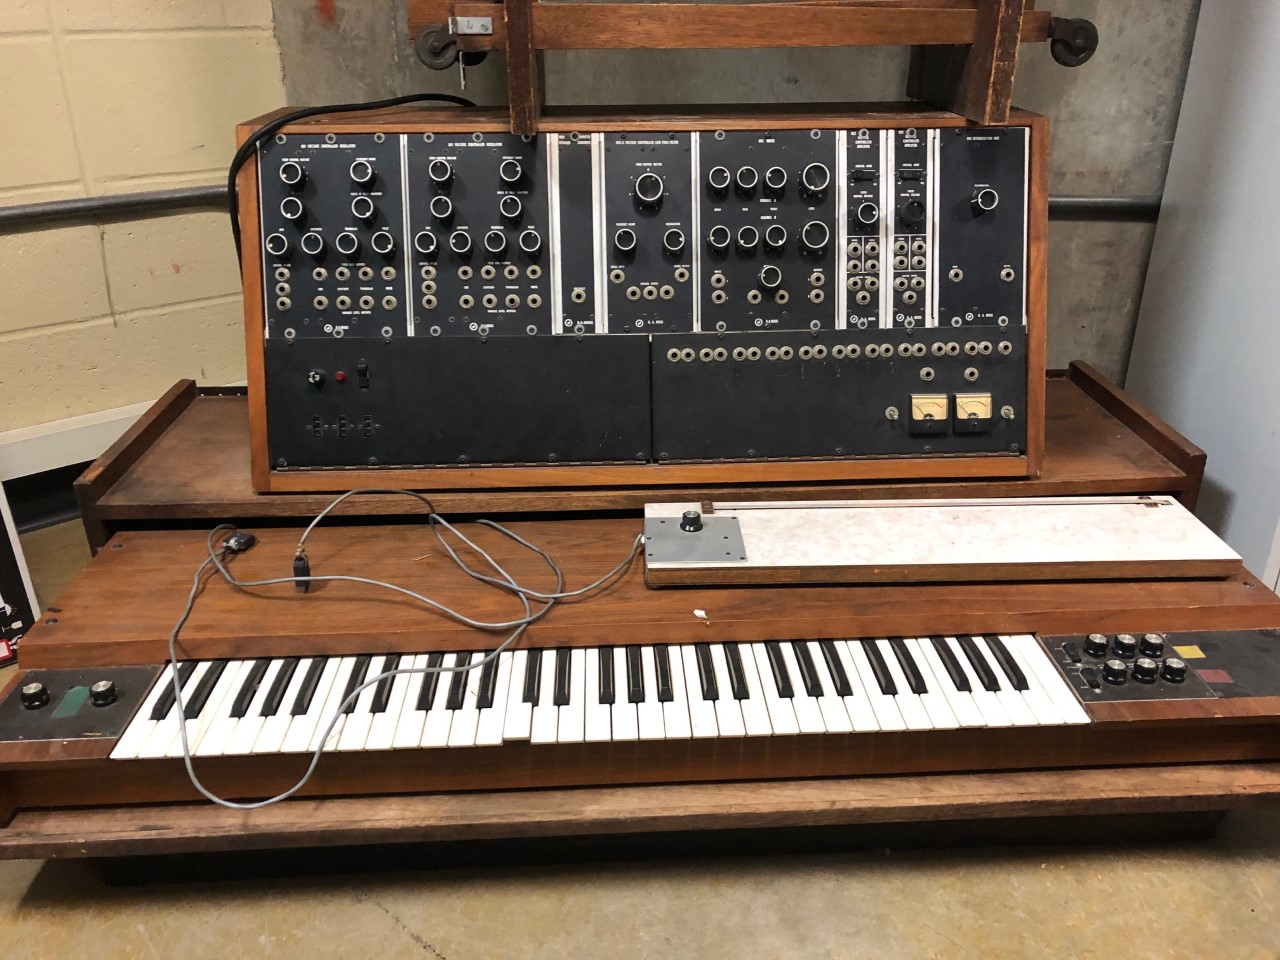 The 1968 Moog synthesizer in storage at UW-Madison's Mead Witter School of Music was likely not owned by Voegeli.